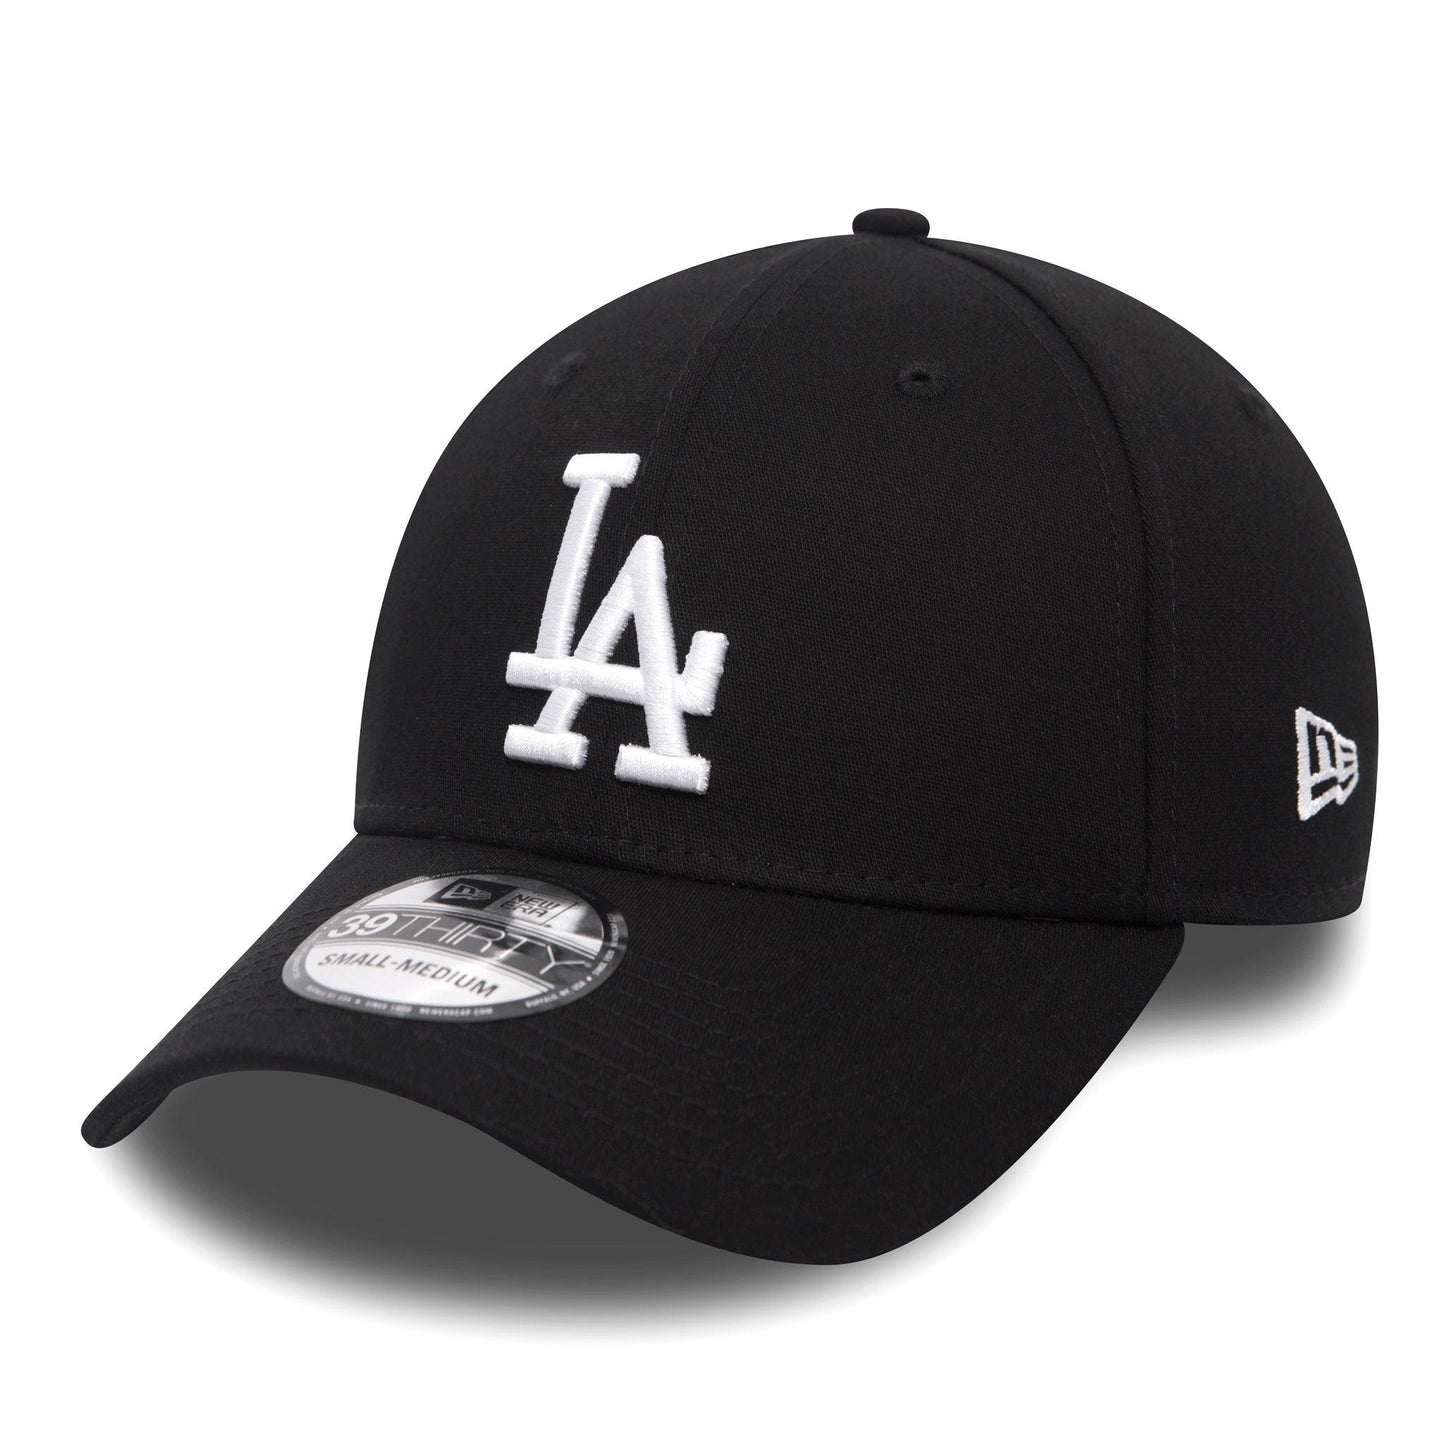 NEW ERA 39THIRTY LOS ANGELES DODGERS  BLACK FITTED CAP